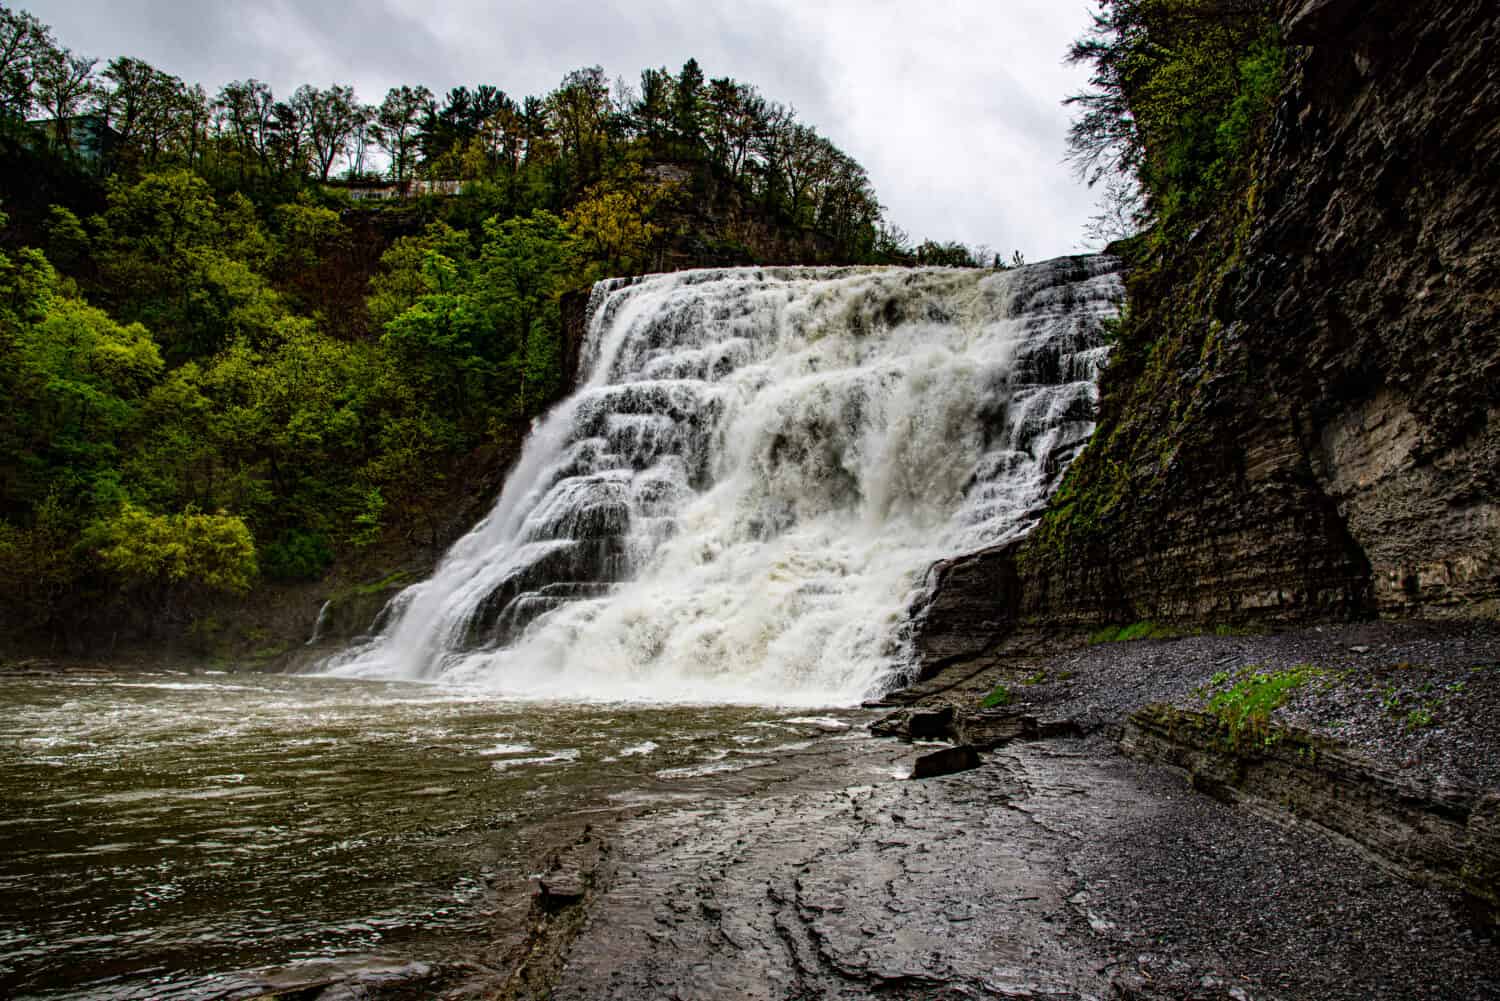 One of the several waterfalls at Ithaca falls in Upstate NY (USA)